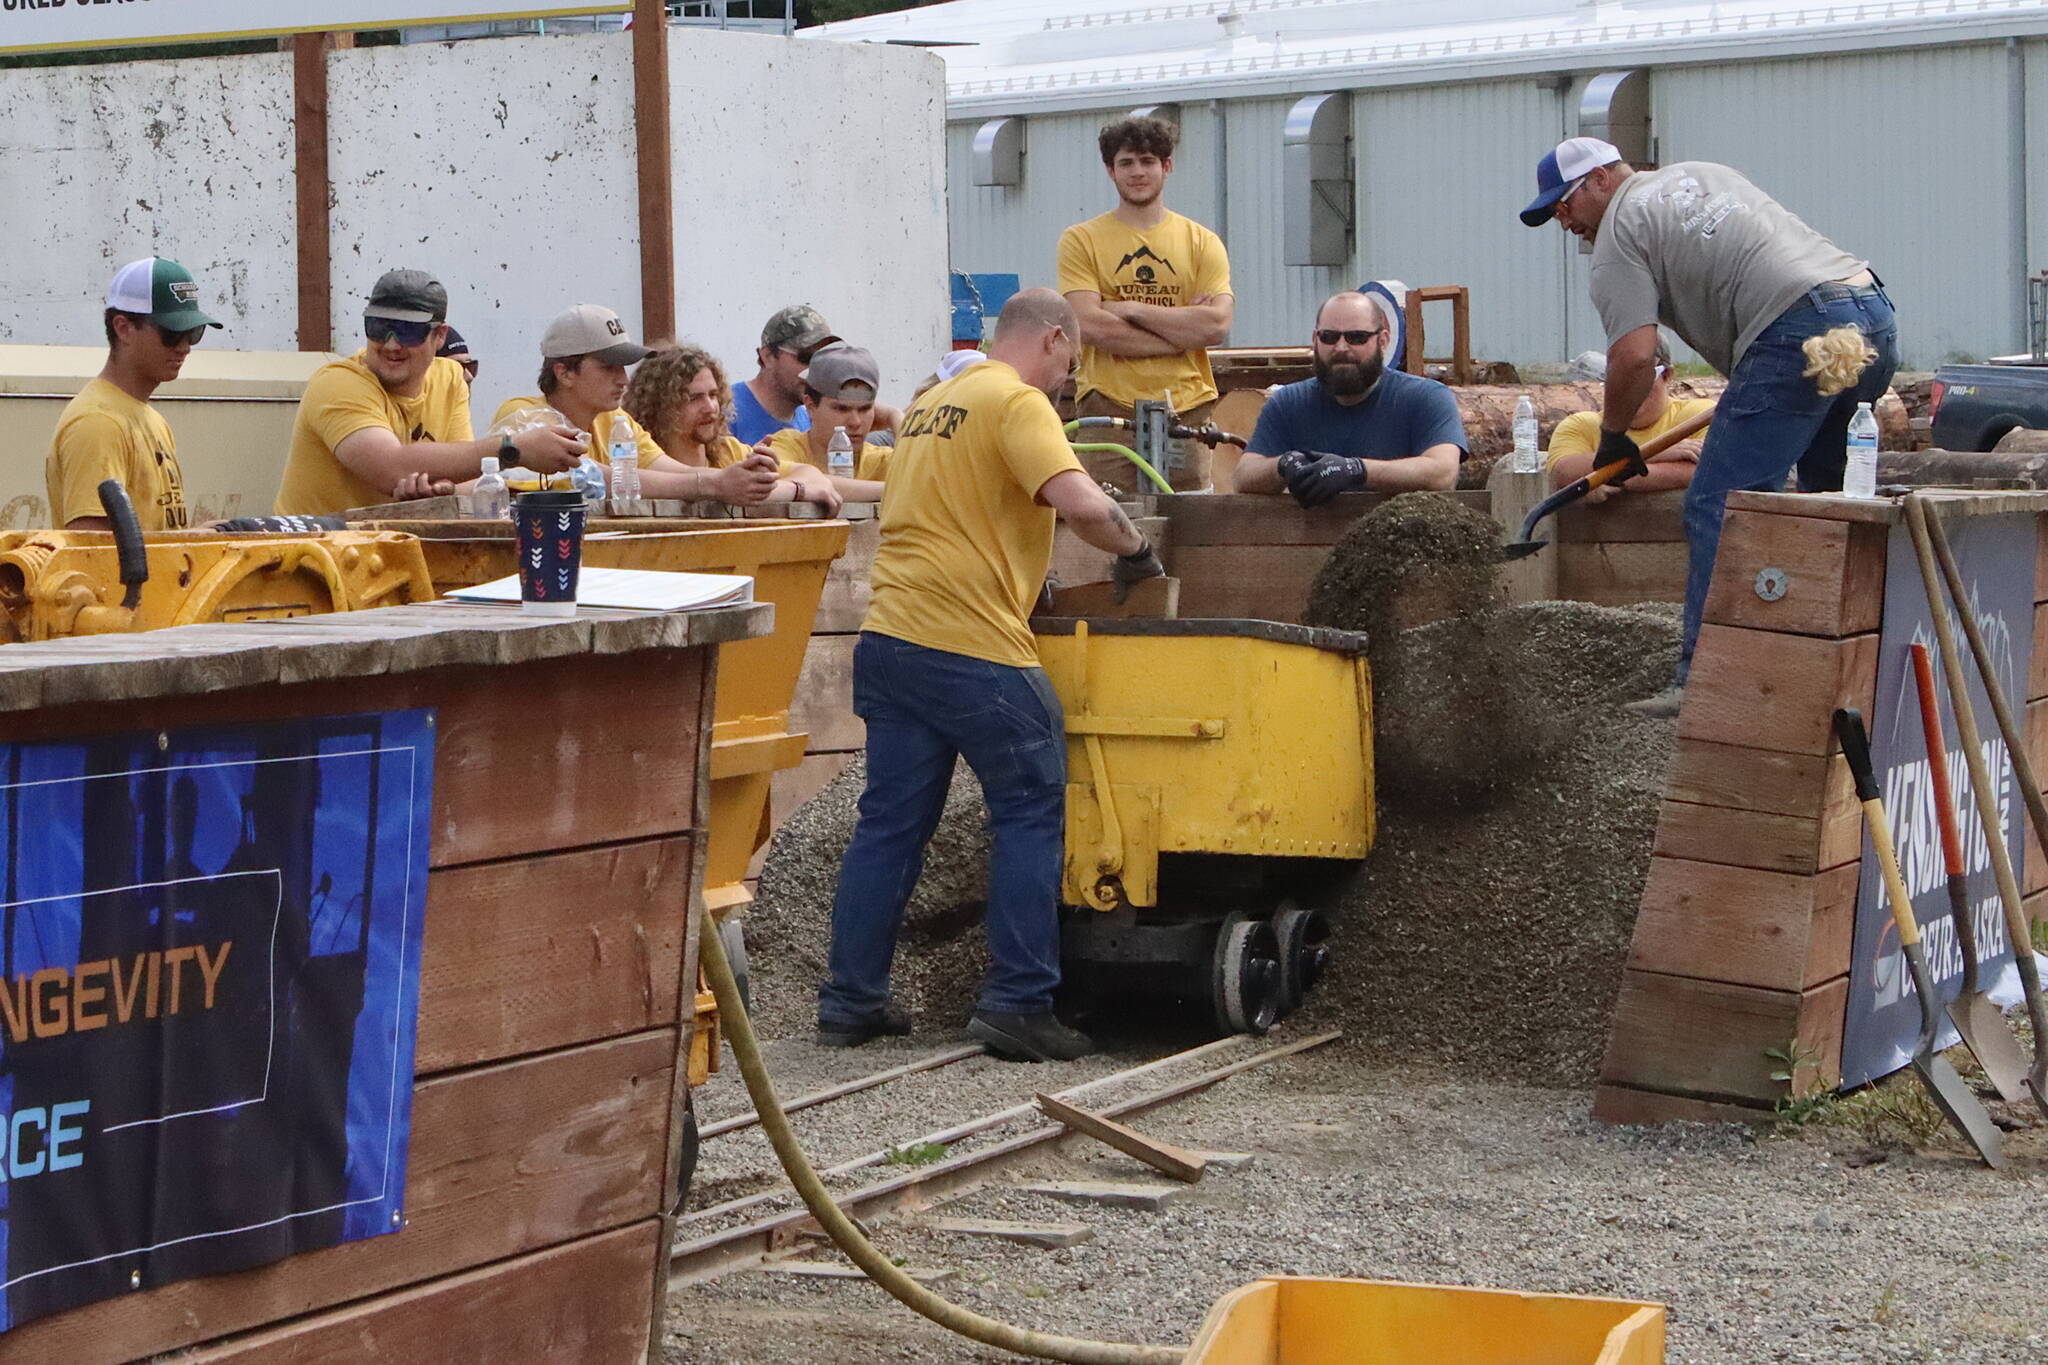 Eddie Petrie shovels gravel into a mine cart as fast as possible during the men’s hand mucking competition as part of Juneau Gold Rush Days on Saturday at Savikko Park. (Mark Sabbatini / Juneau Empire)